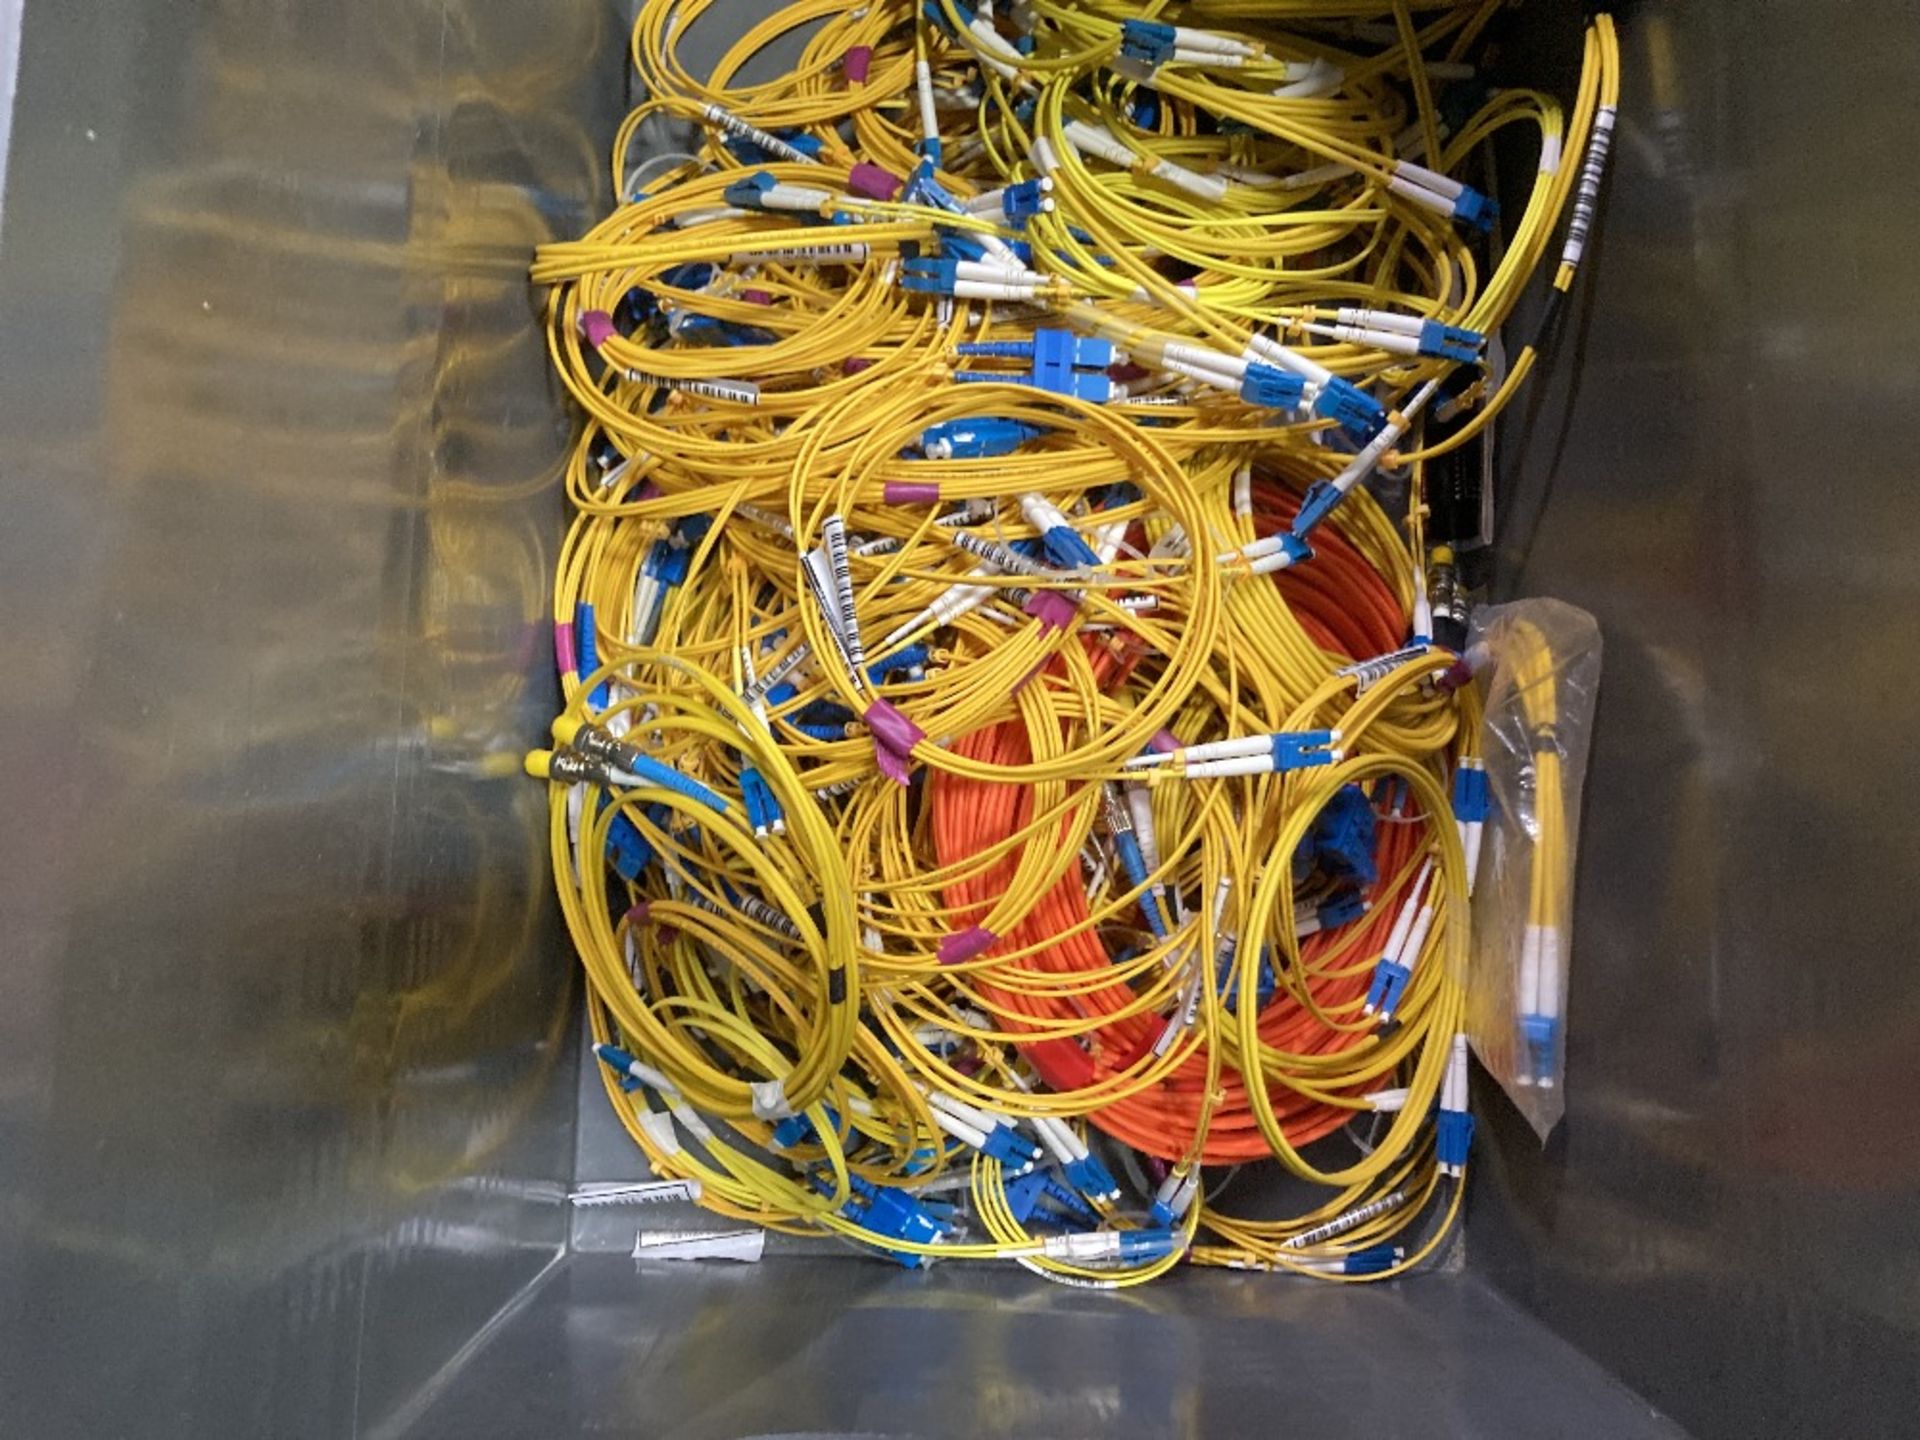 Quantity of 40m And 2m Single Mode LC-SC Duplex Cross Patch Leads With (2) Plastic Lin Bins - Image 6 of 8